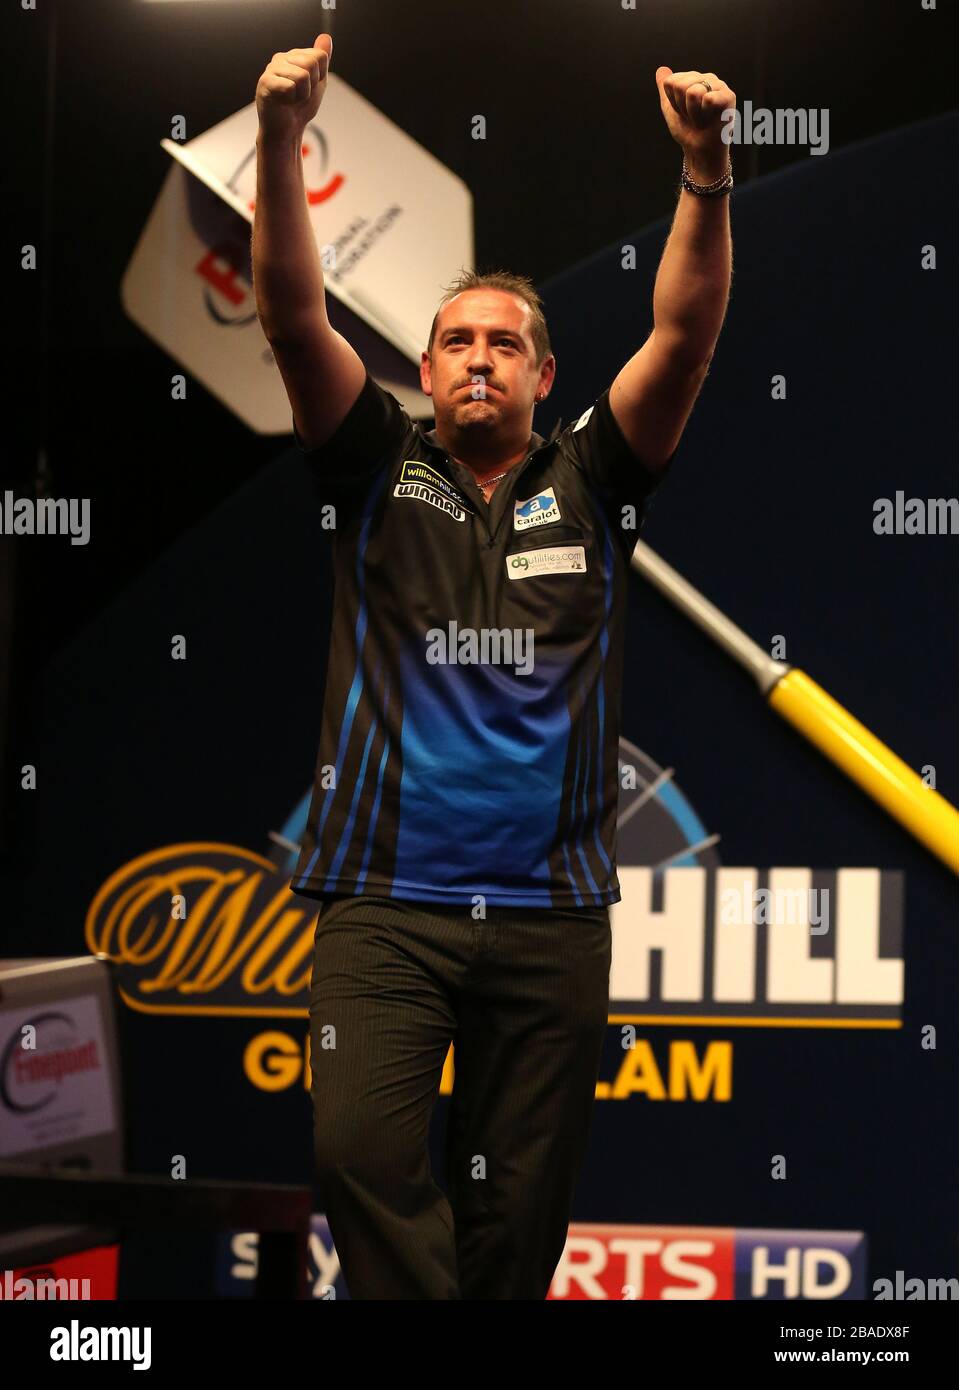 Dean Winstanley celebrates victory is his second round match against Arron Monk Stock Photo